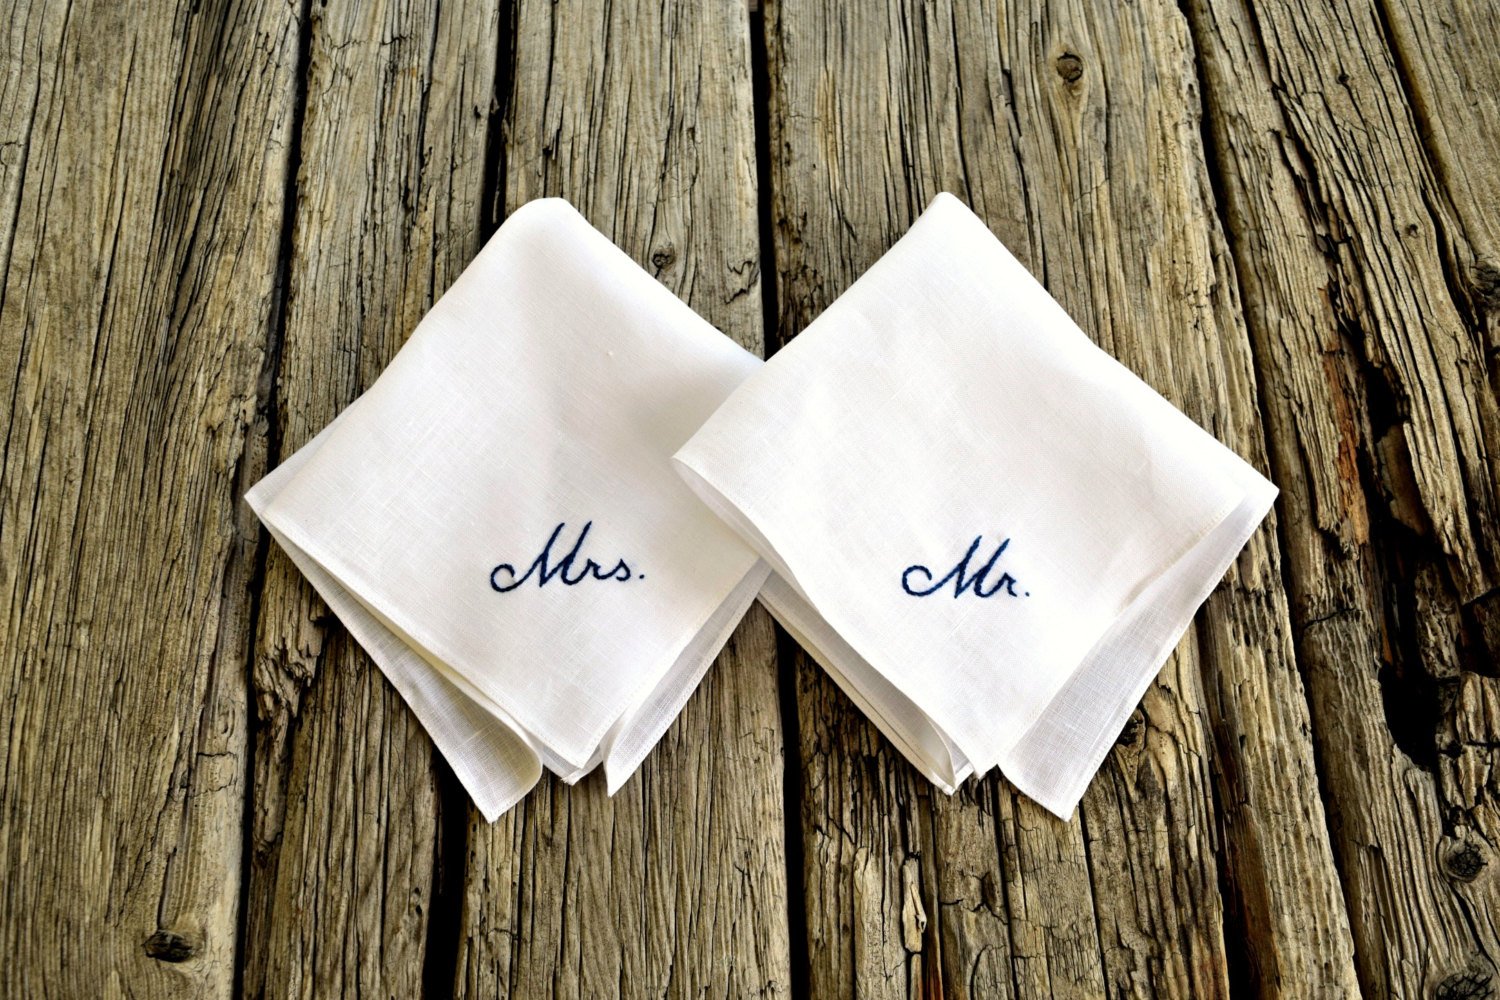 Two white linen handkerchiefs, one embroidered Mr. and one Mrs.